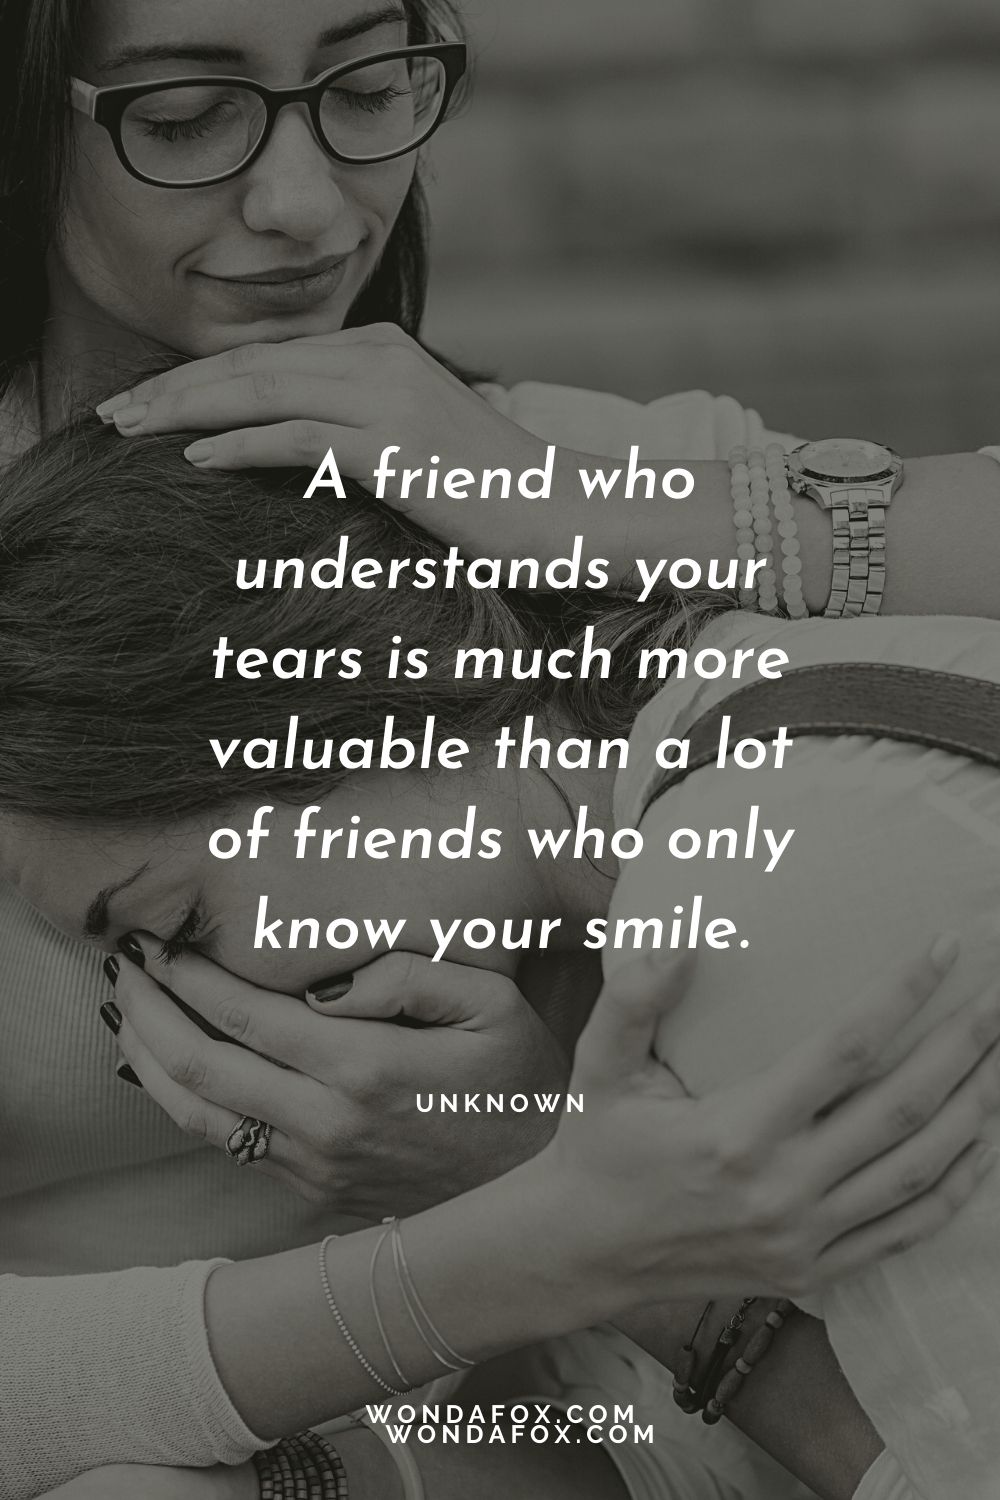 A friend who understands your tears is much more valuable than a lot of friends who only know your smile.